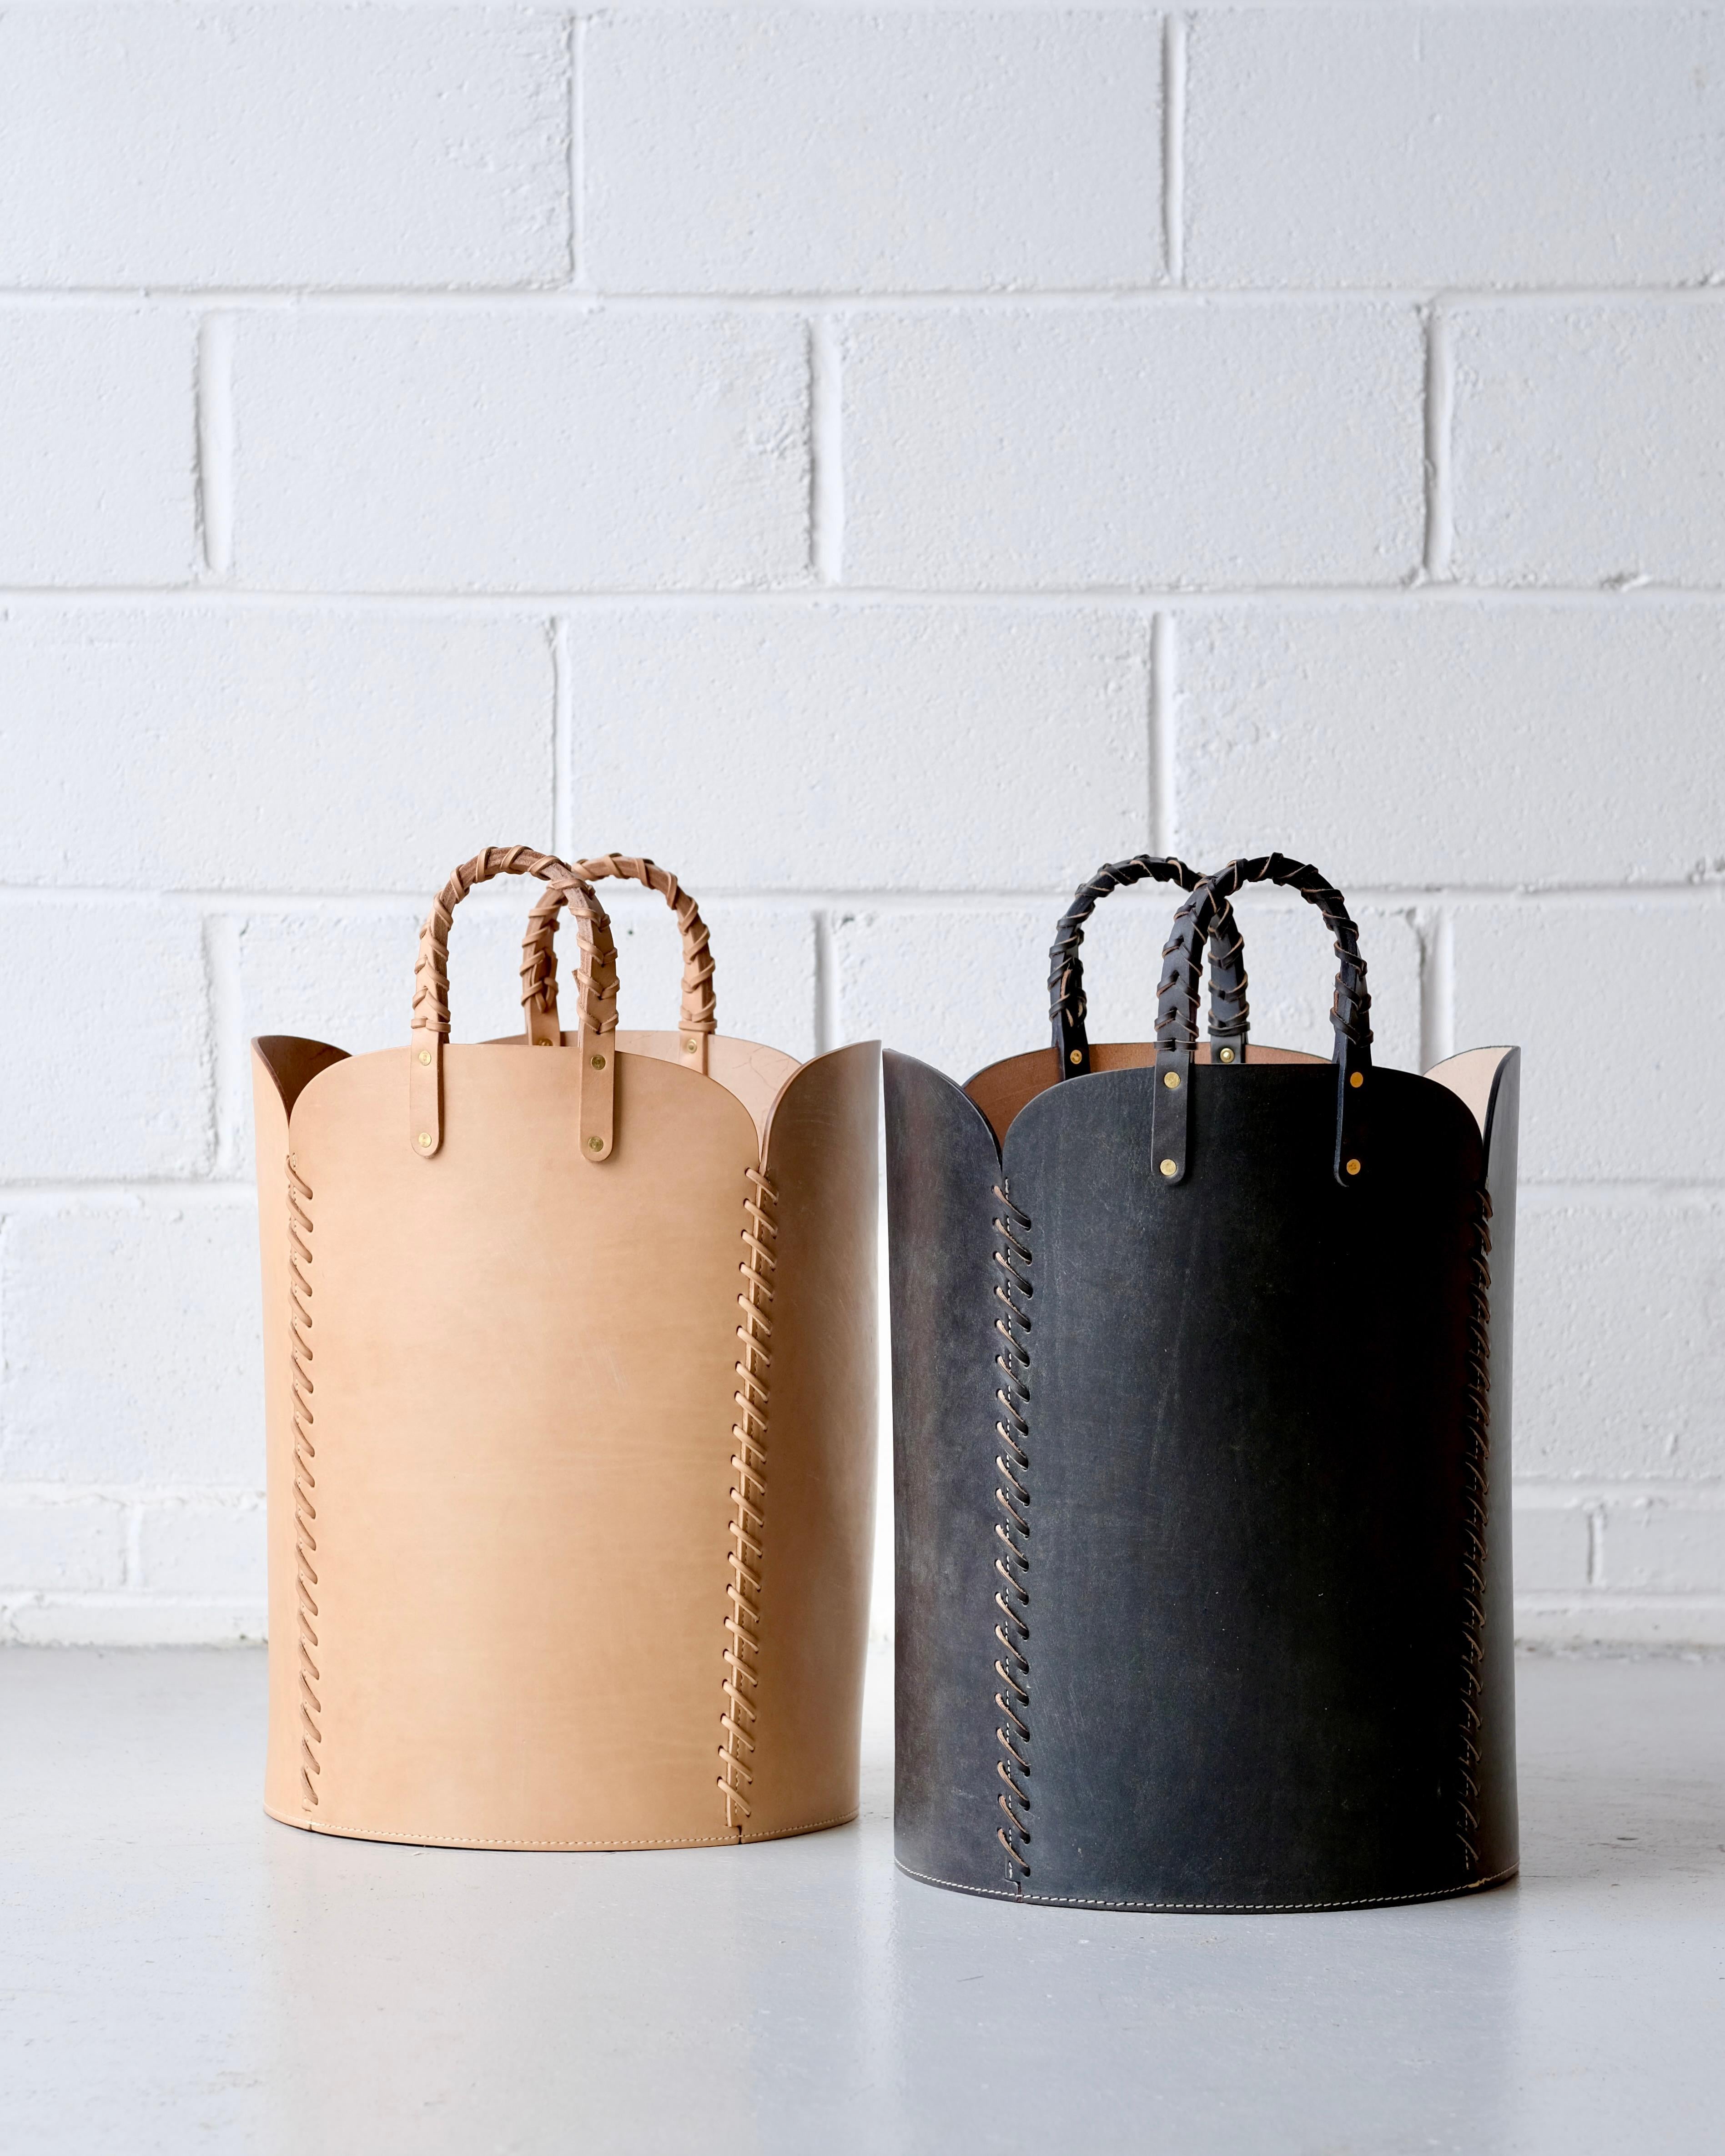 The Quarto utility basket is an incredibly functional and versatile piece. Made from the finest oak bark tanned bridle leather from one of the last remaining bark tanneries in the world, it uses large panels of hand dyed and dubbined thick bridle